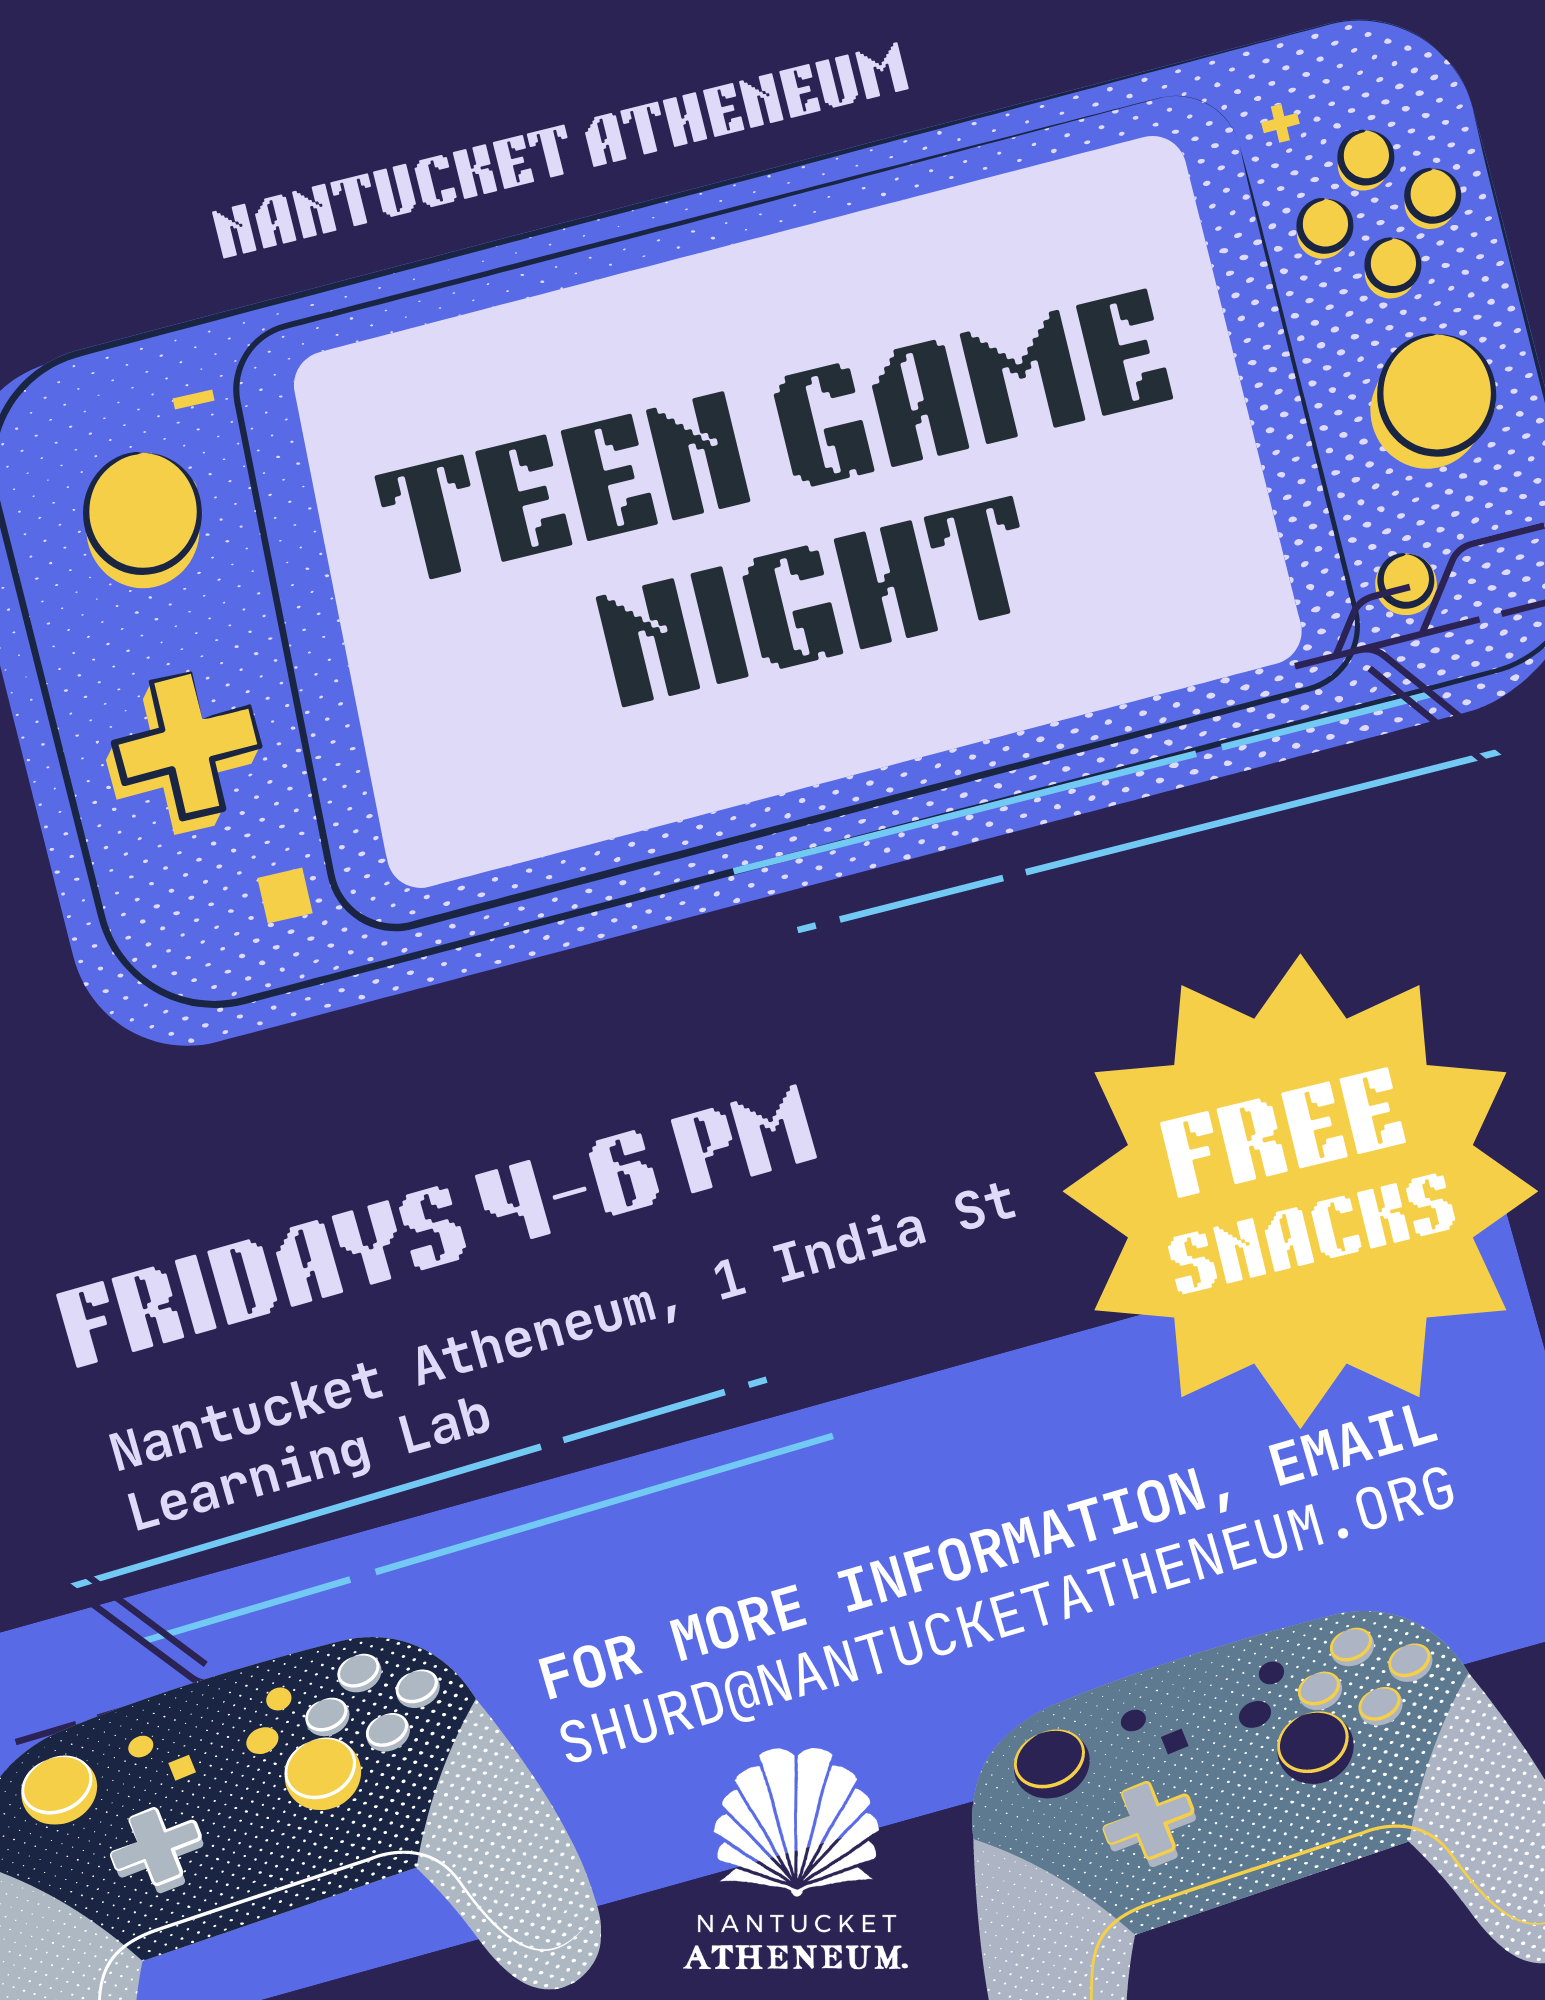 Blue and purple image of a Nintendo Switch. The text reads "teen game night, Friday 4-6 pm"